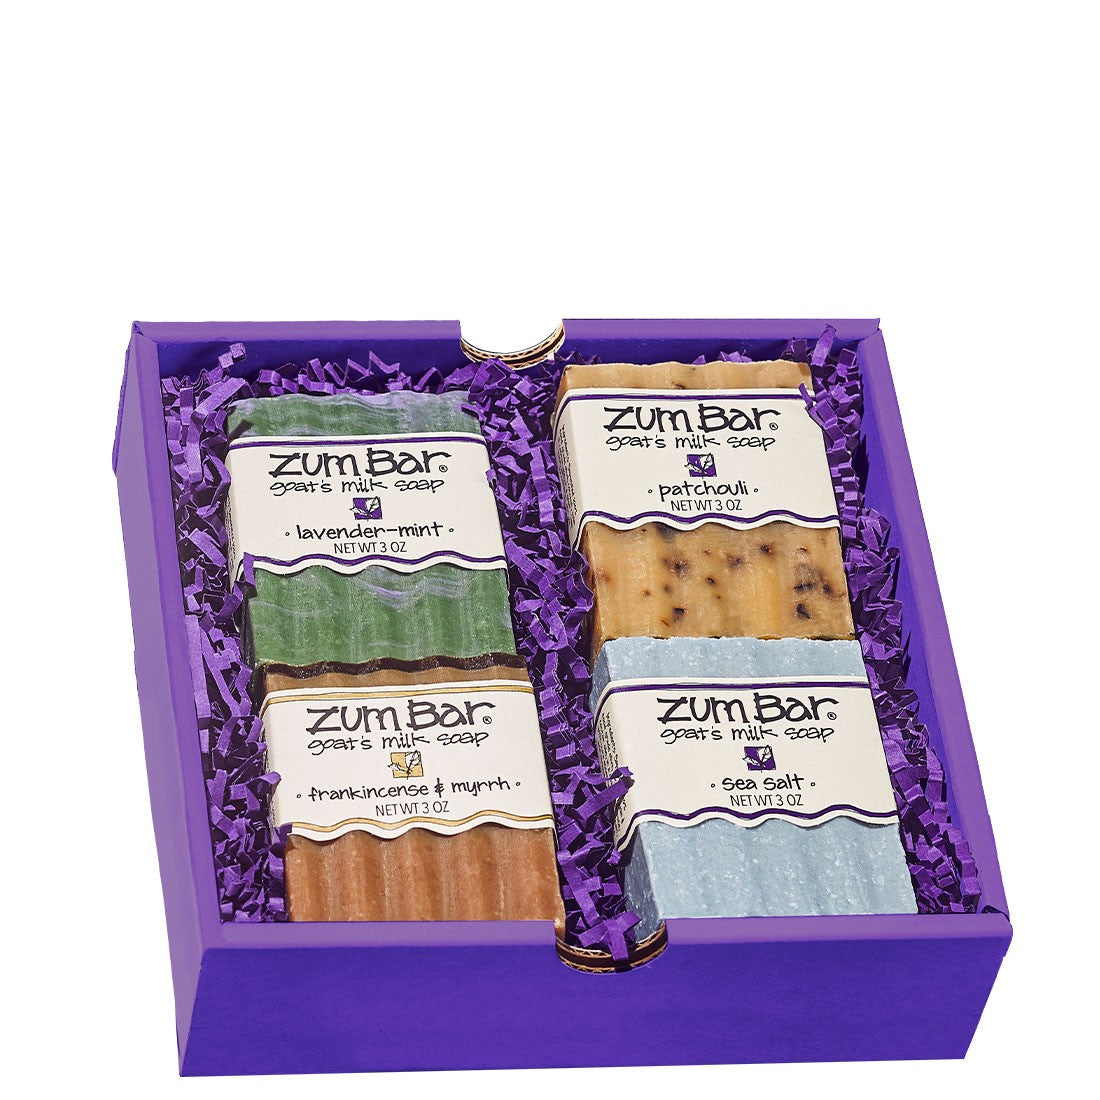 Square gift box containing 4 various Zum Bar Soaps laid in purple crinkle paper.